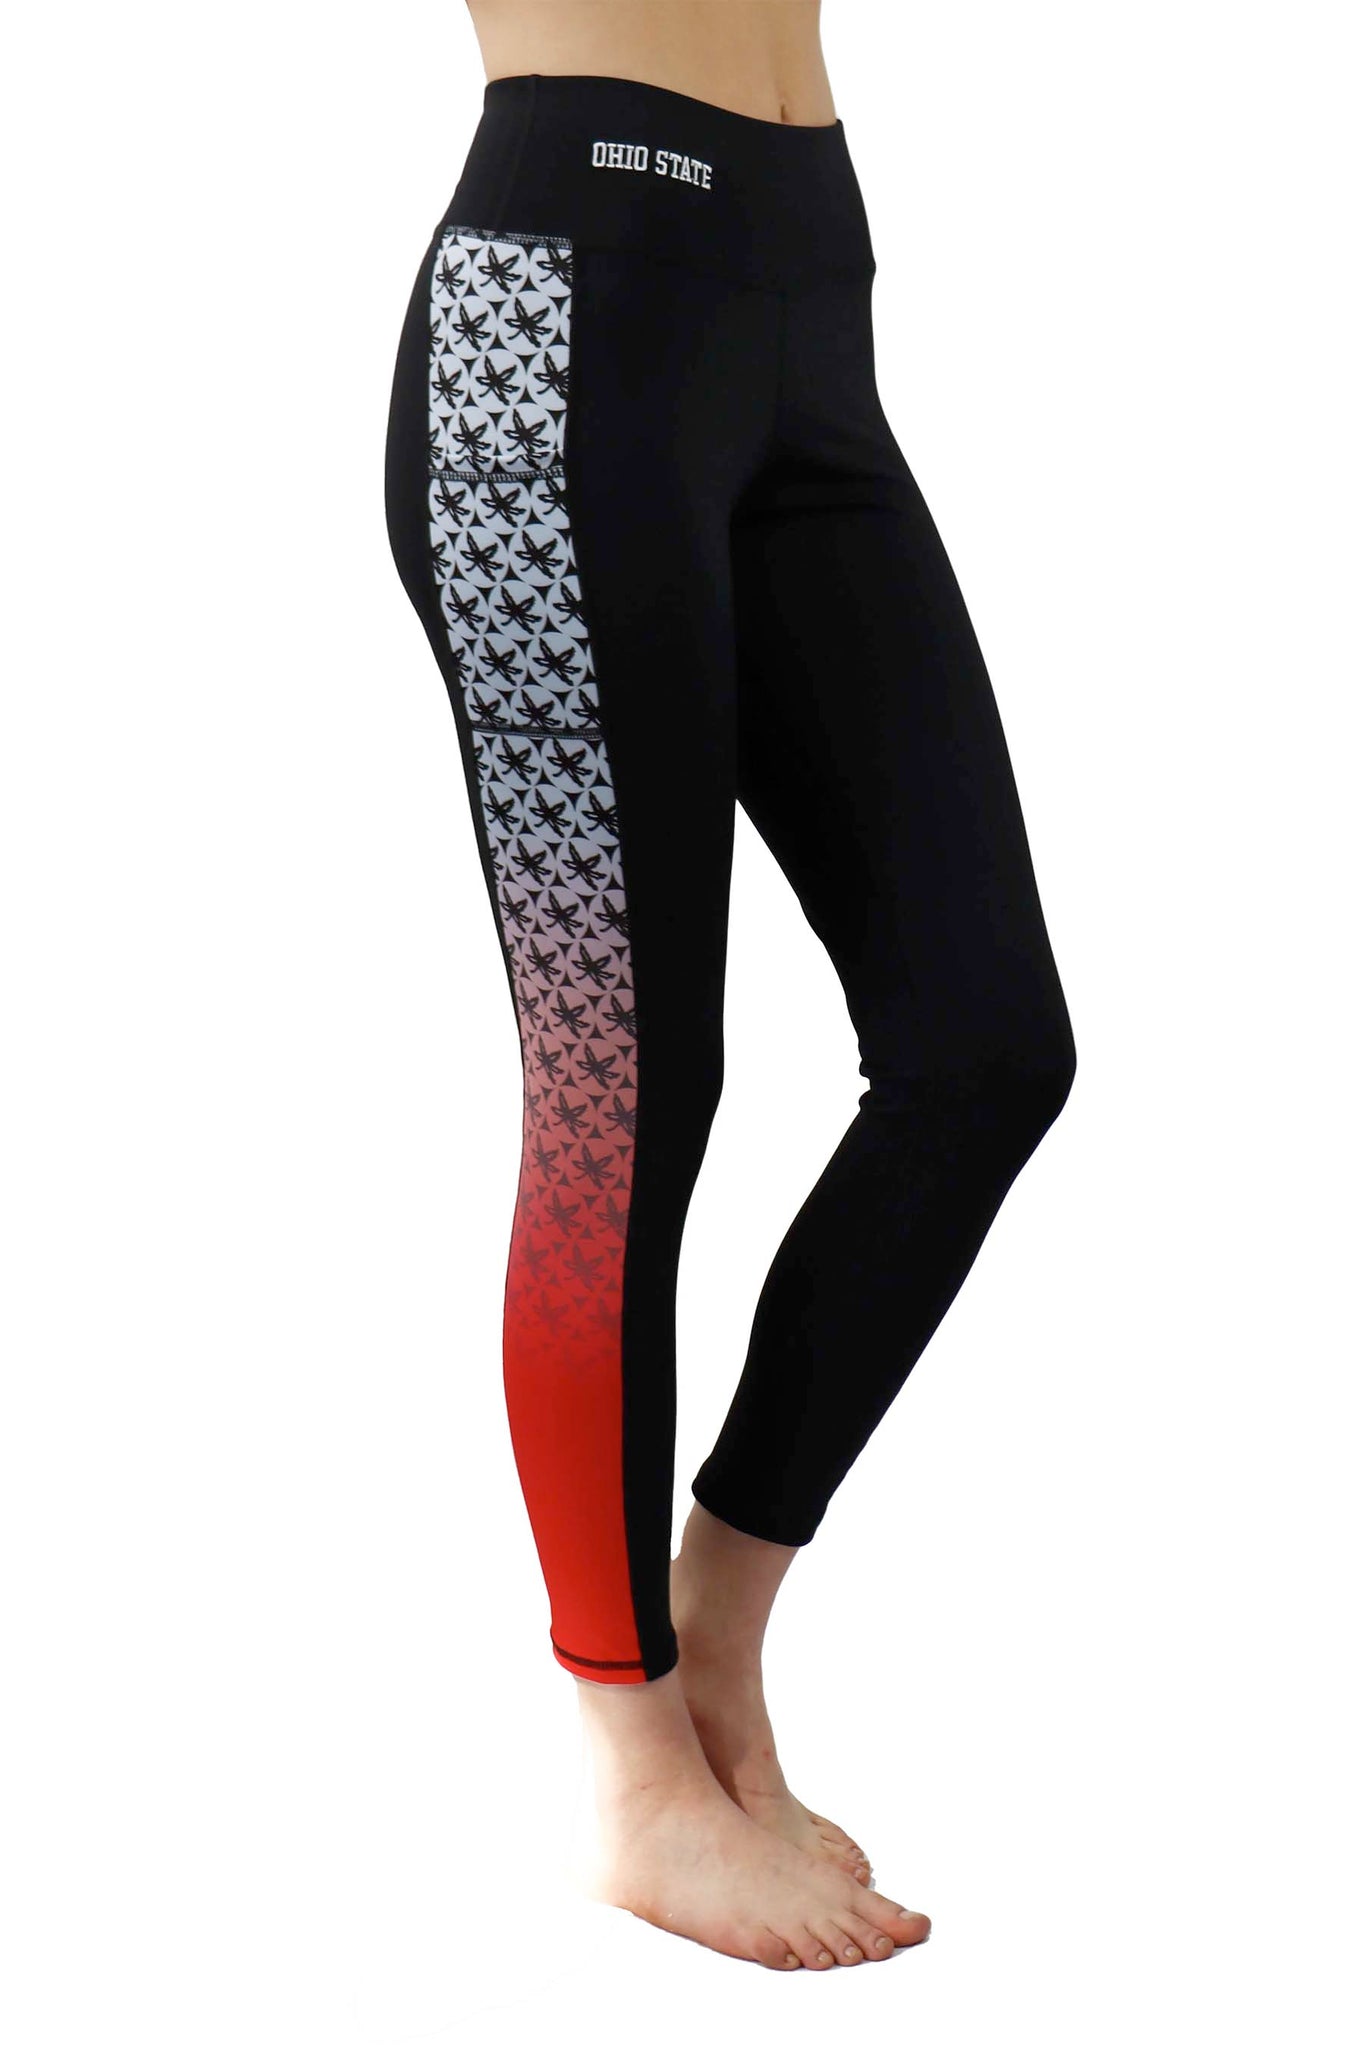 OHIO STATE BUCKEYE LEAVES OMBRE CELL PHONE POCKET LEGGING - OSU Sports Fans